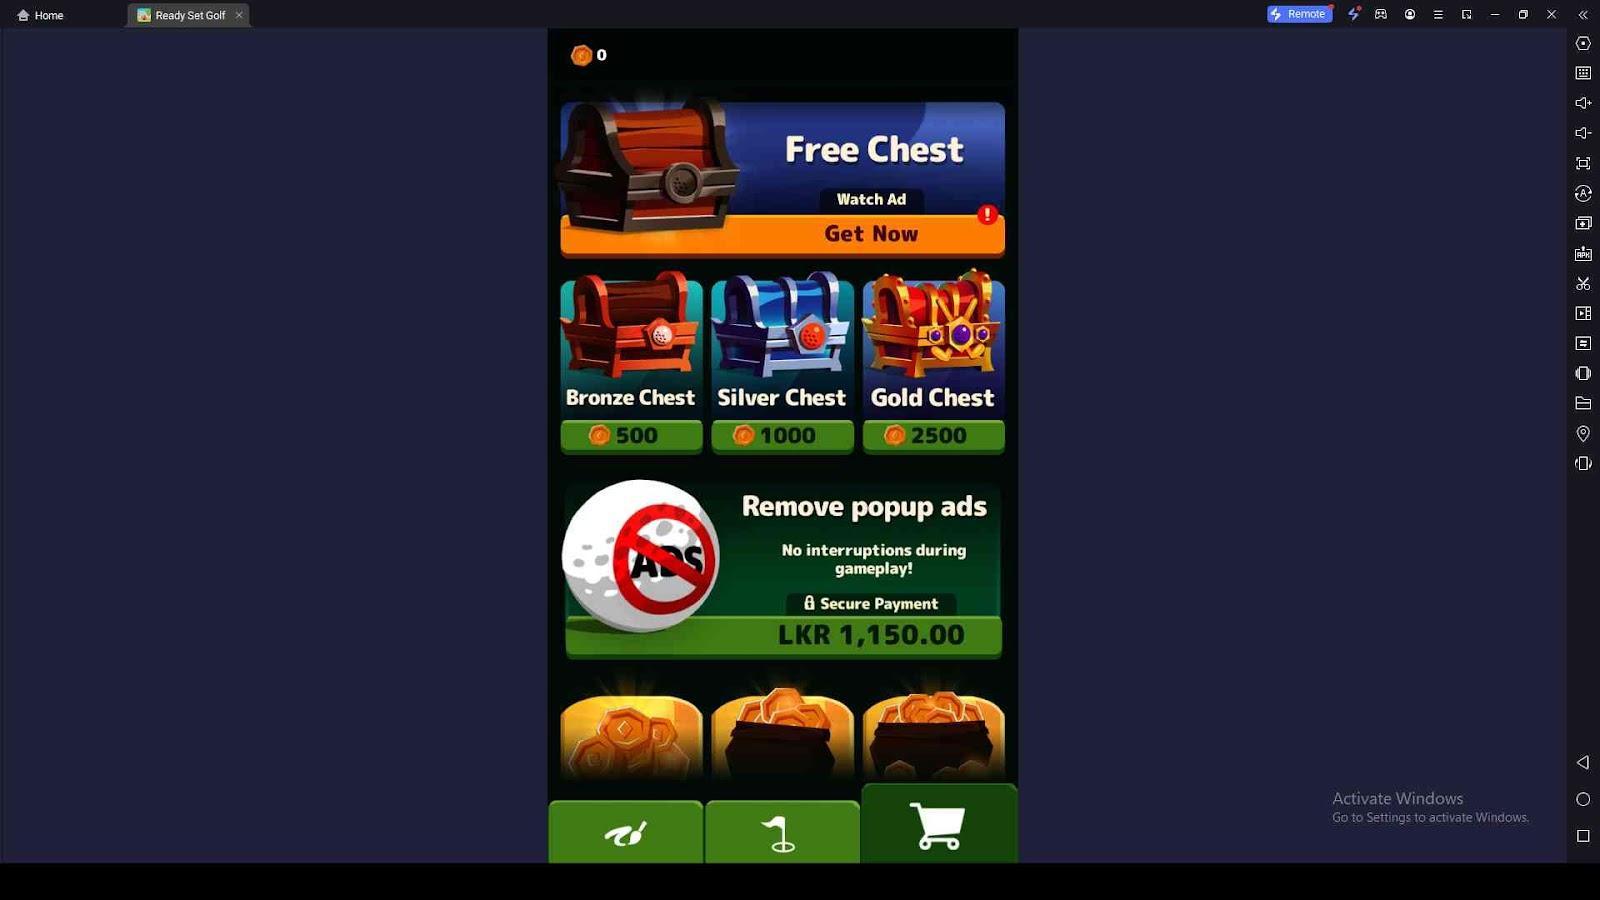 Buying Chests with Coins